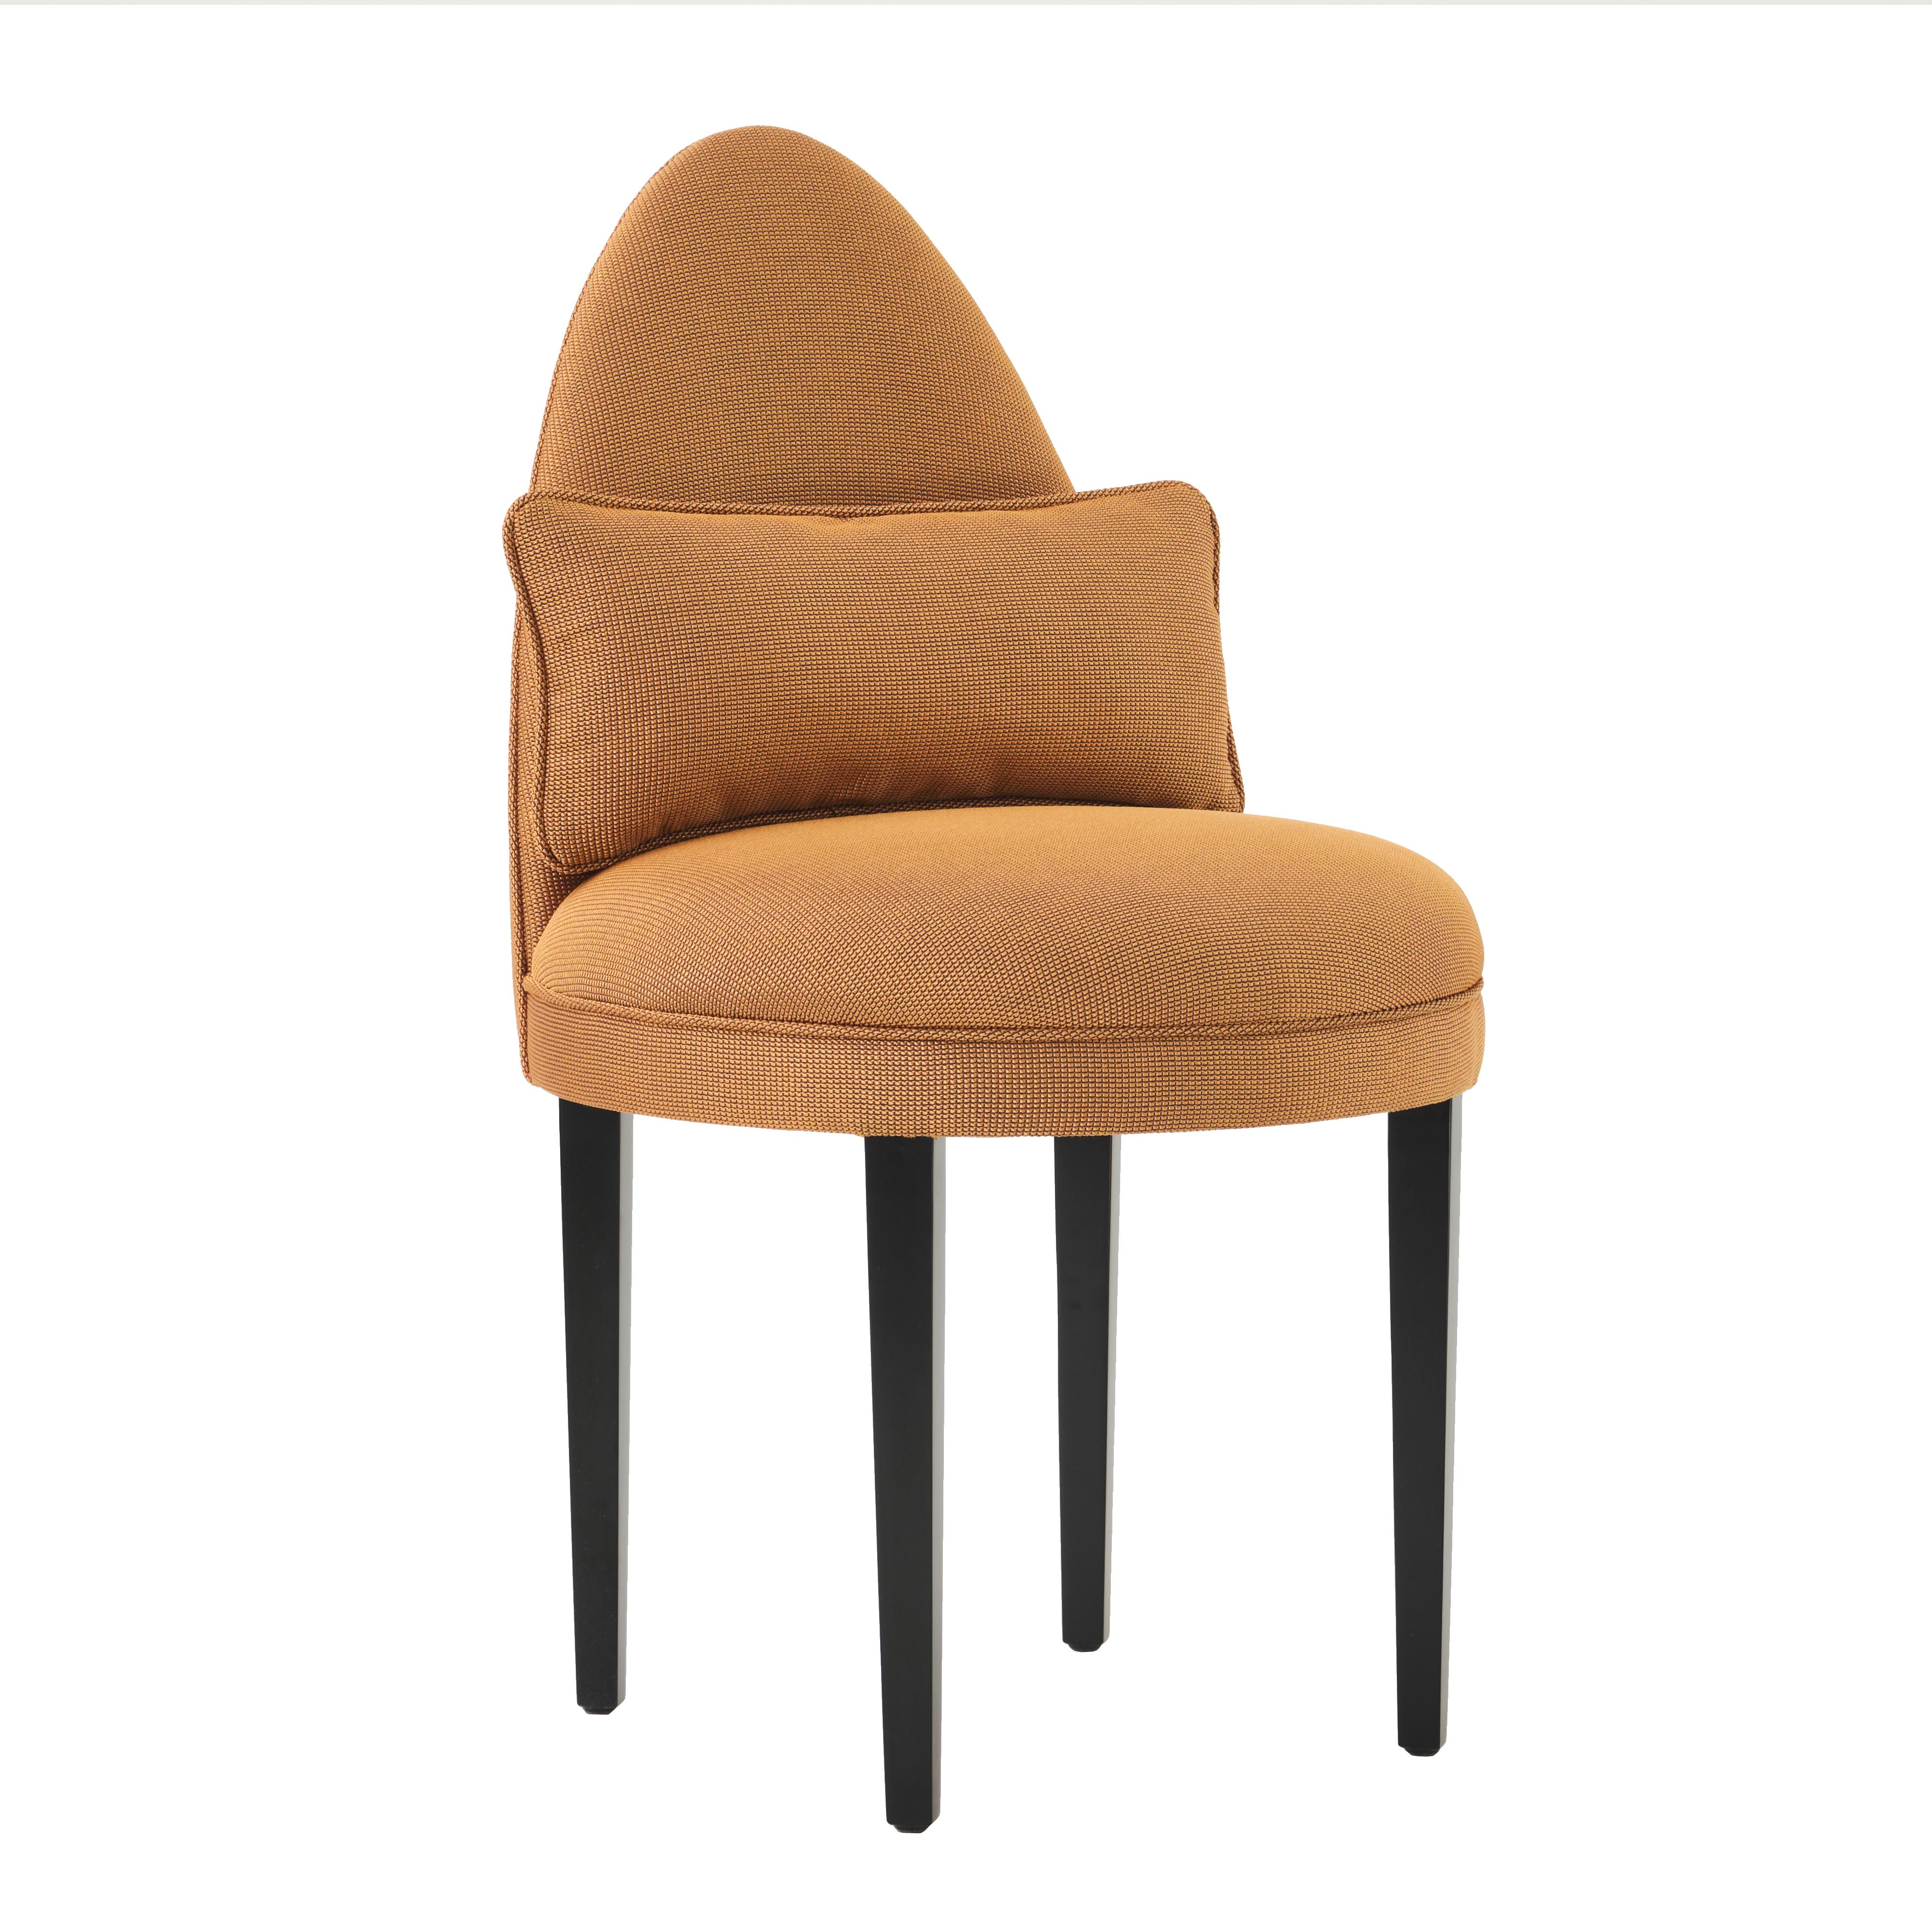 With a curvaceous and sculptural form, Elsa allows you to dine in style on a compact chair that still delivers on comfort.

Inspired by Elsa Peretti, a true pioneer of design. She was a masterful artisan who revolutionised the world of design and